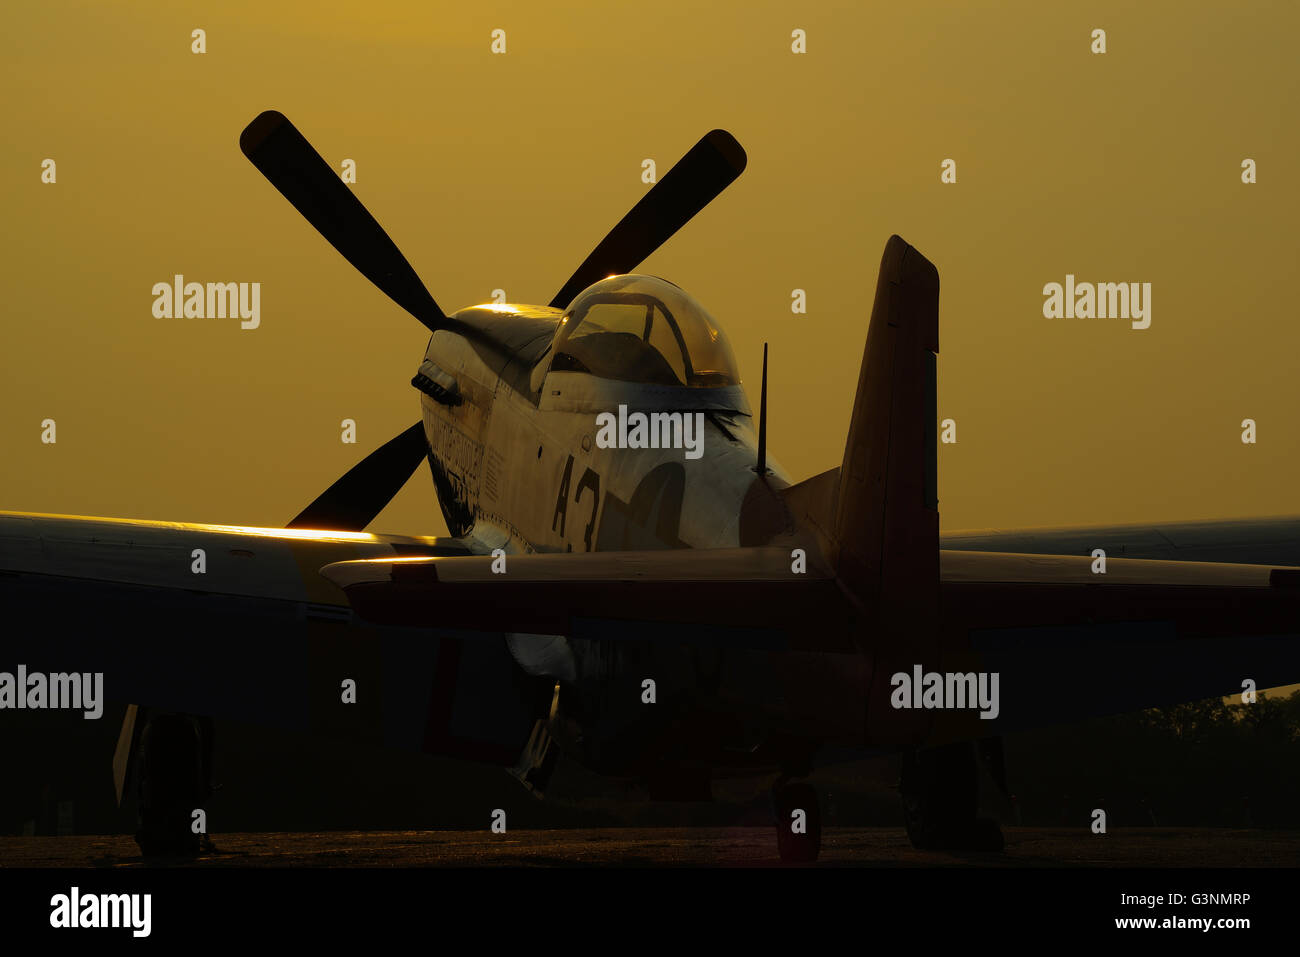 P-51D, Mustang, Red Tail, Tuskegee Airmen, Stock Photo